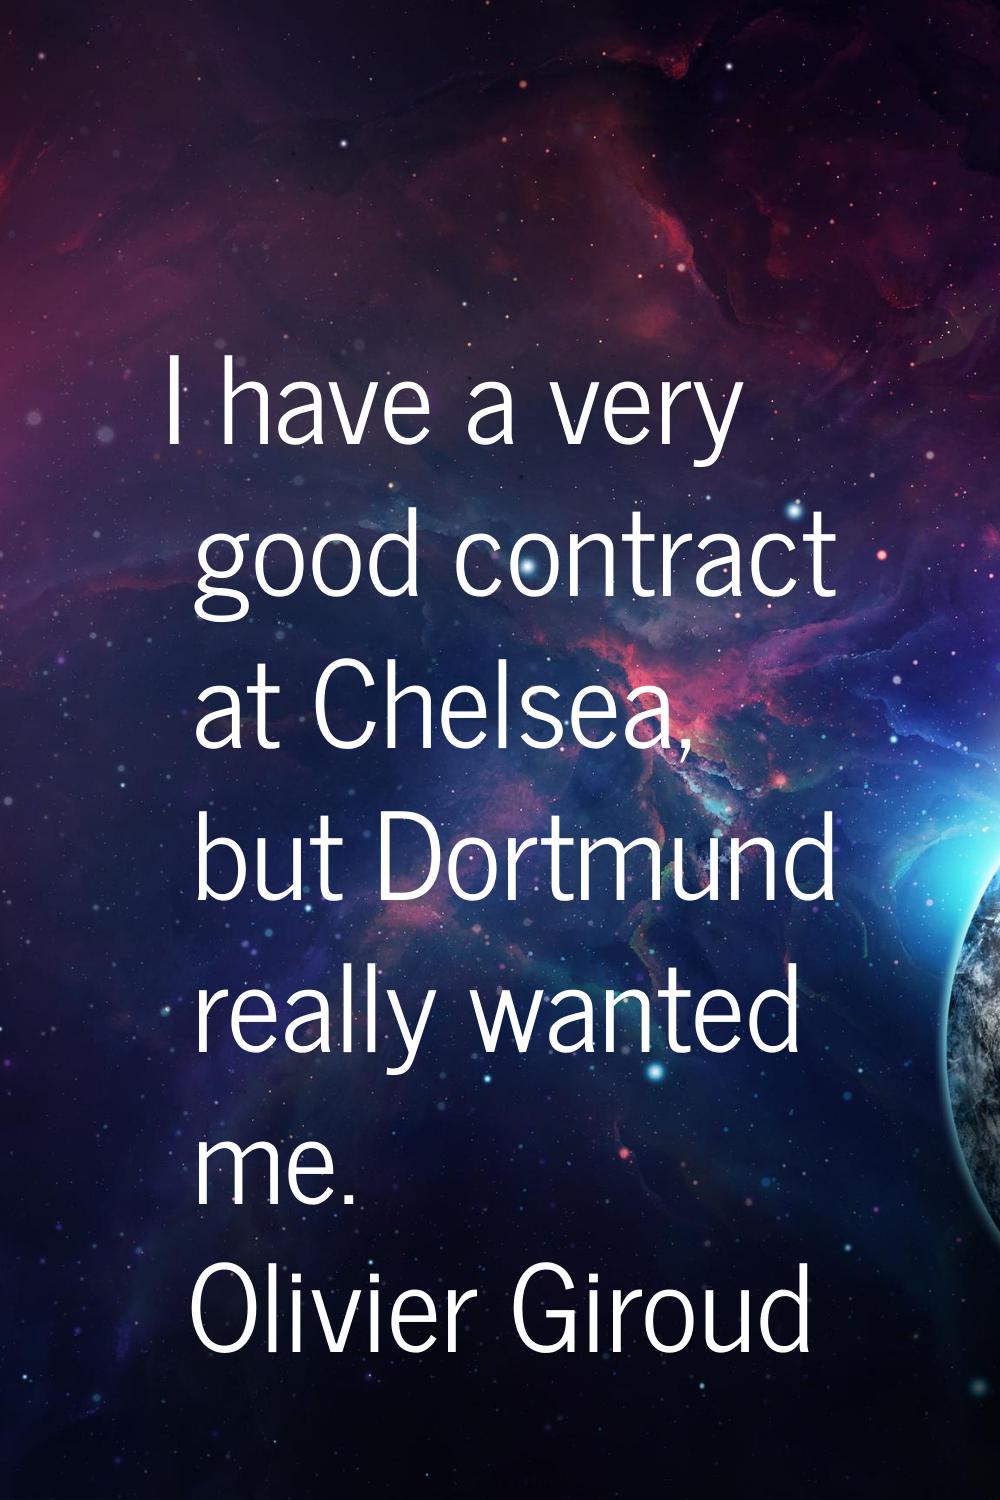 I have a very good contract at Chelsea, but Dortmund really wanted me.